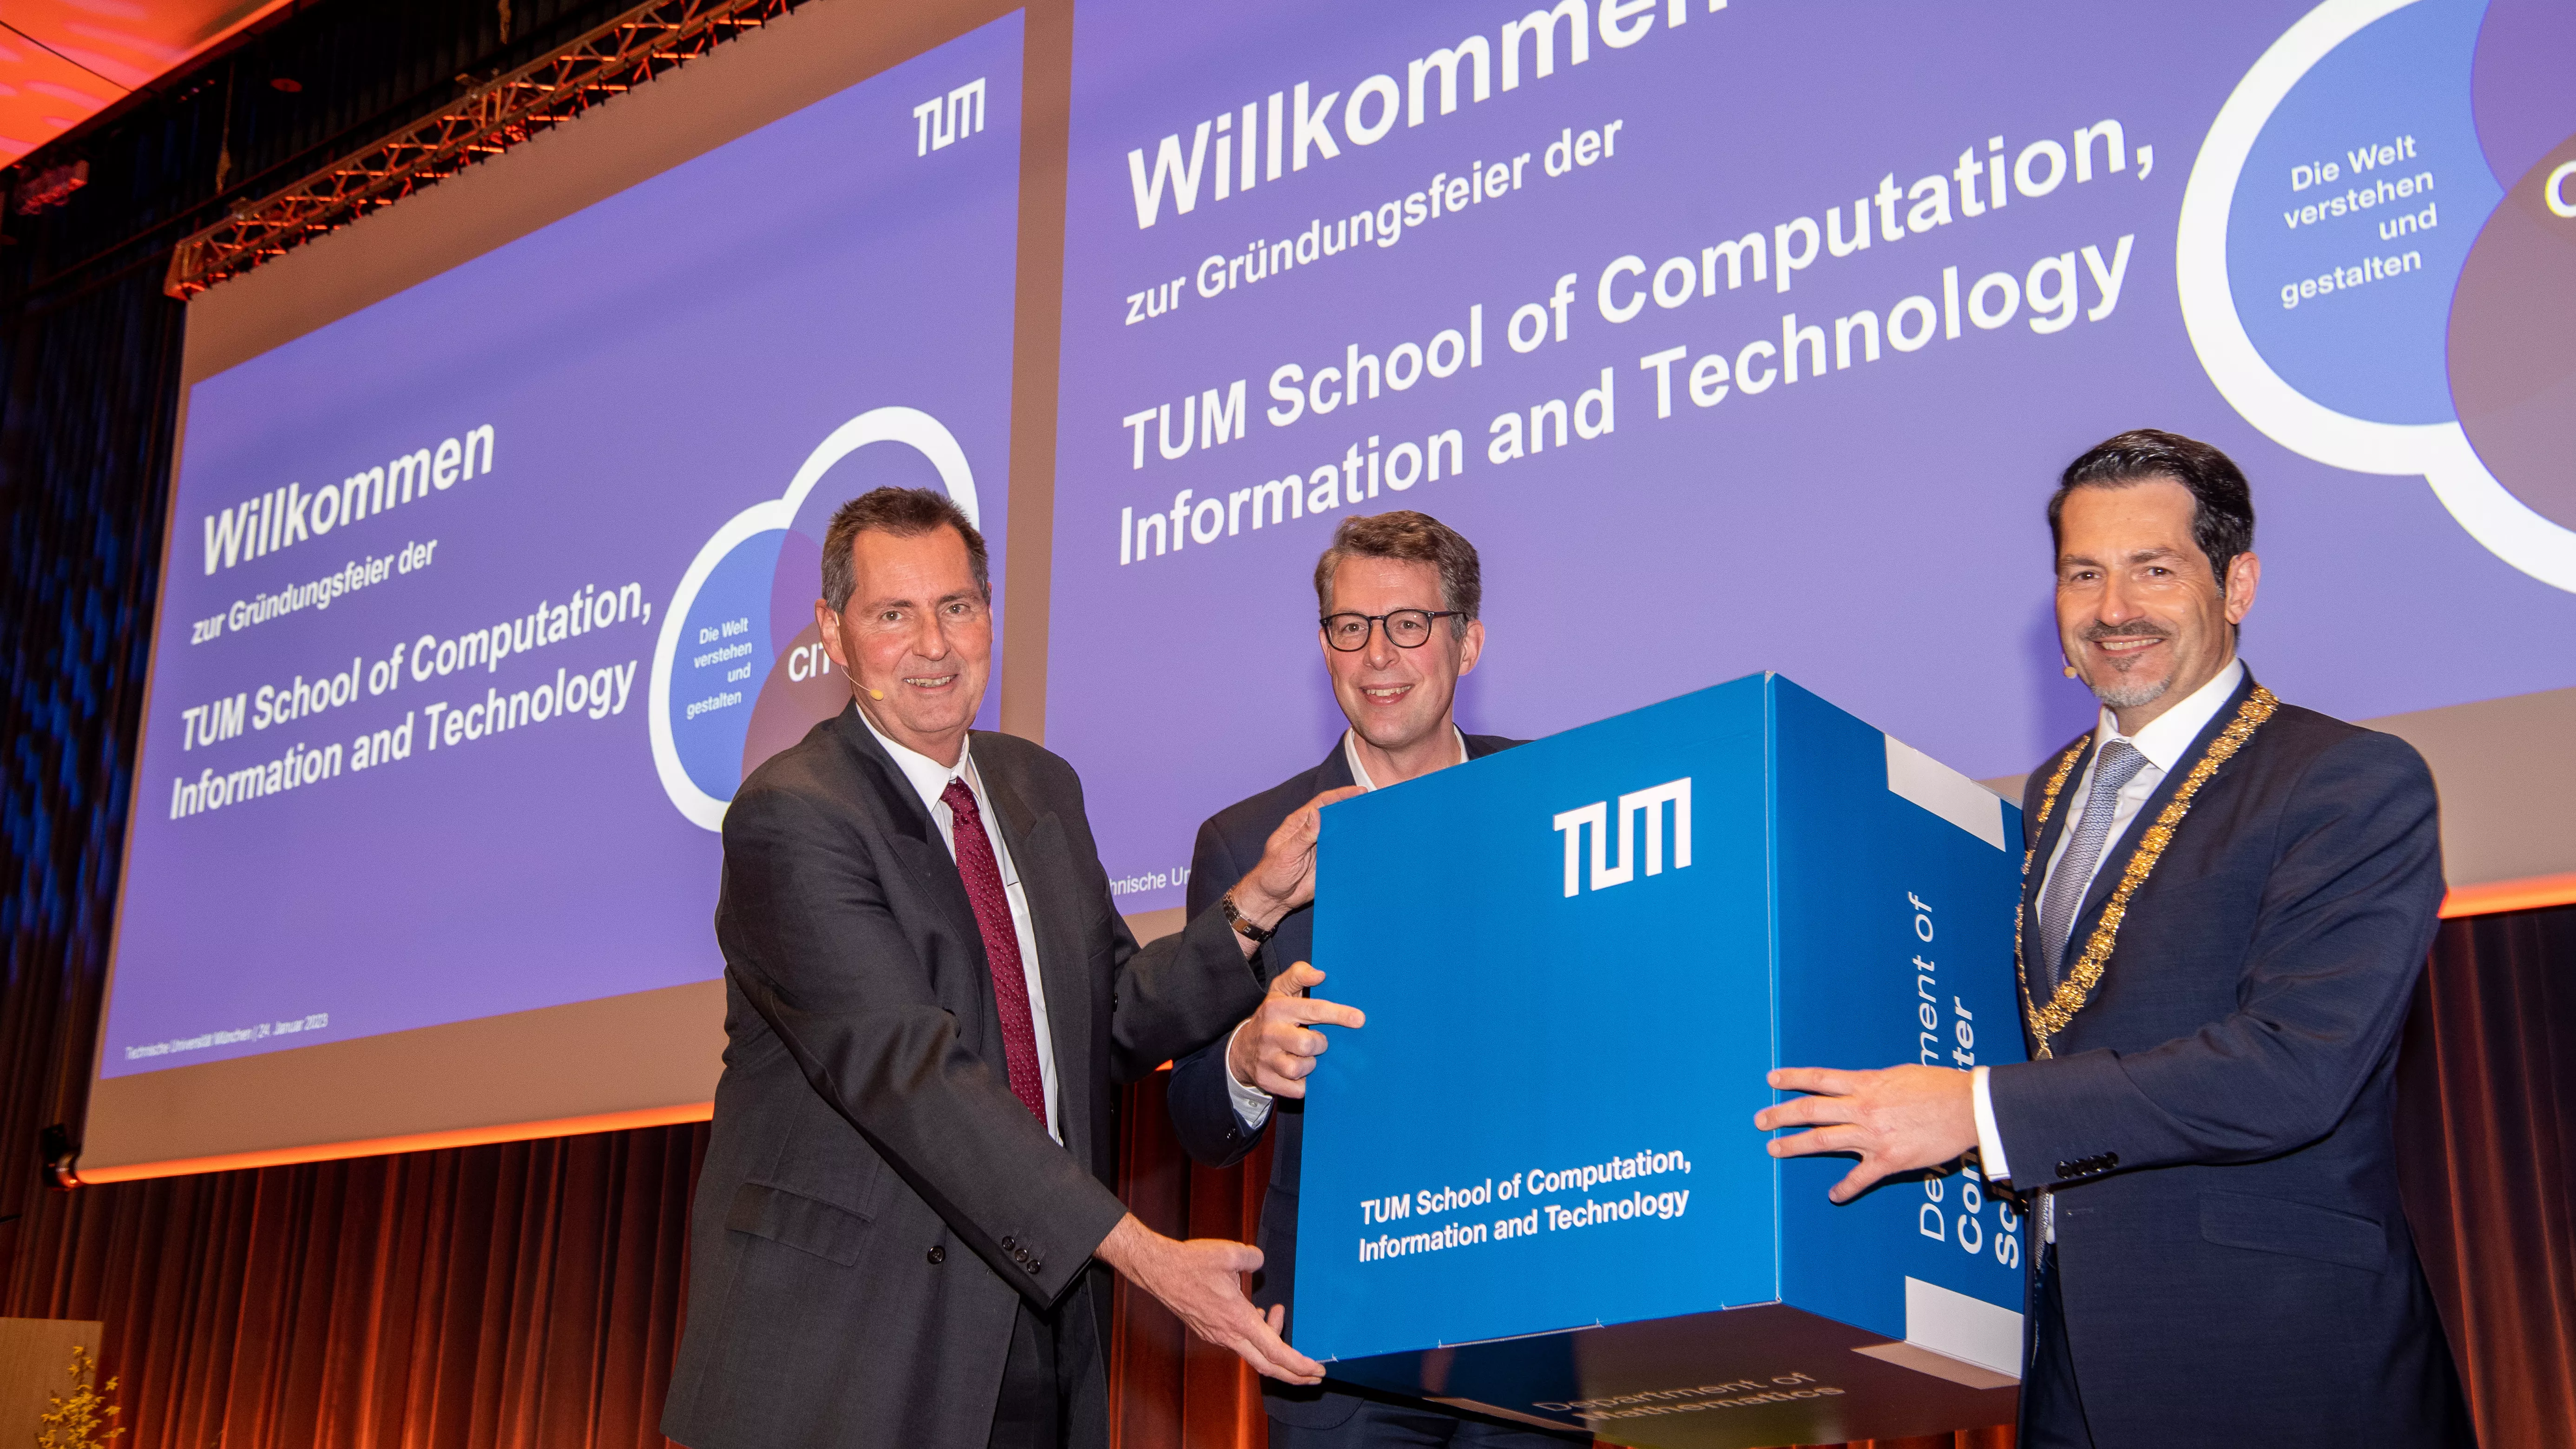 Founding Dean Prof. Hans-Joachim Bungartz (from left), Bavaria's Minister of Science Markus Blume and TUM President Prof. Thomas F. Hofmann at the founding ceremony of the TUM School of Computation, Information and Technology (CIT).